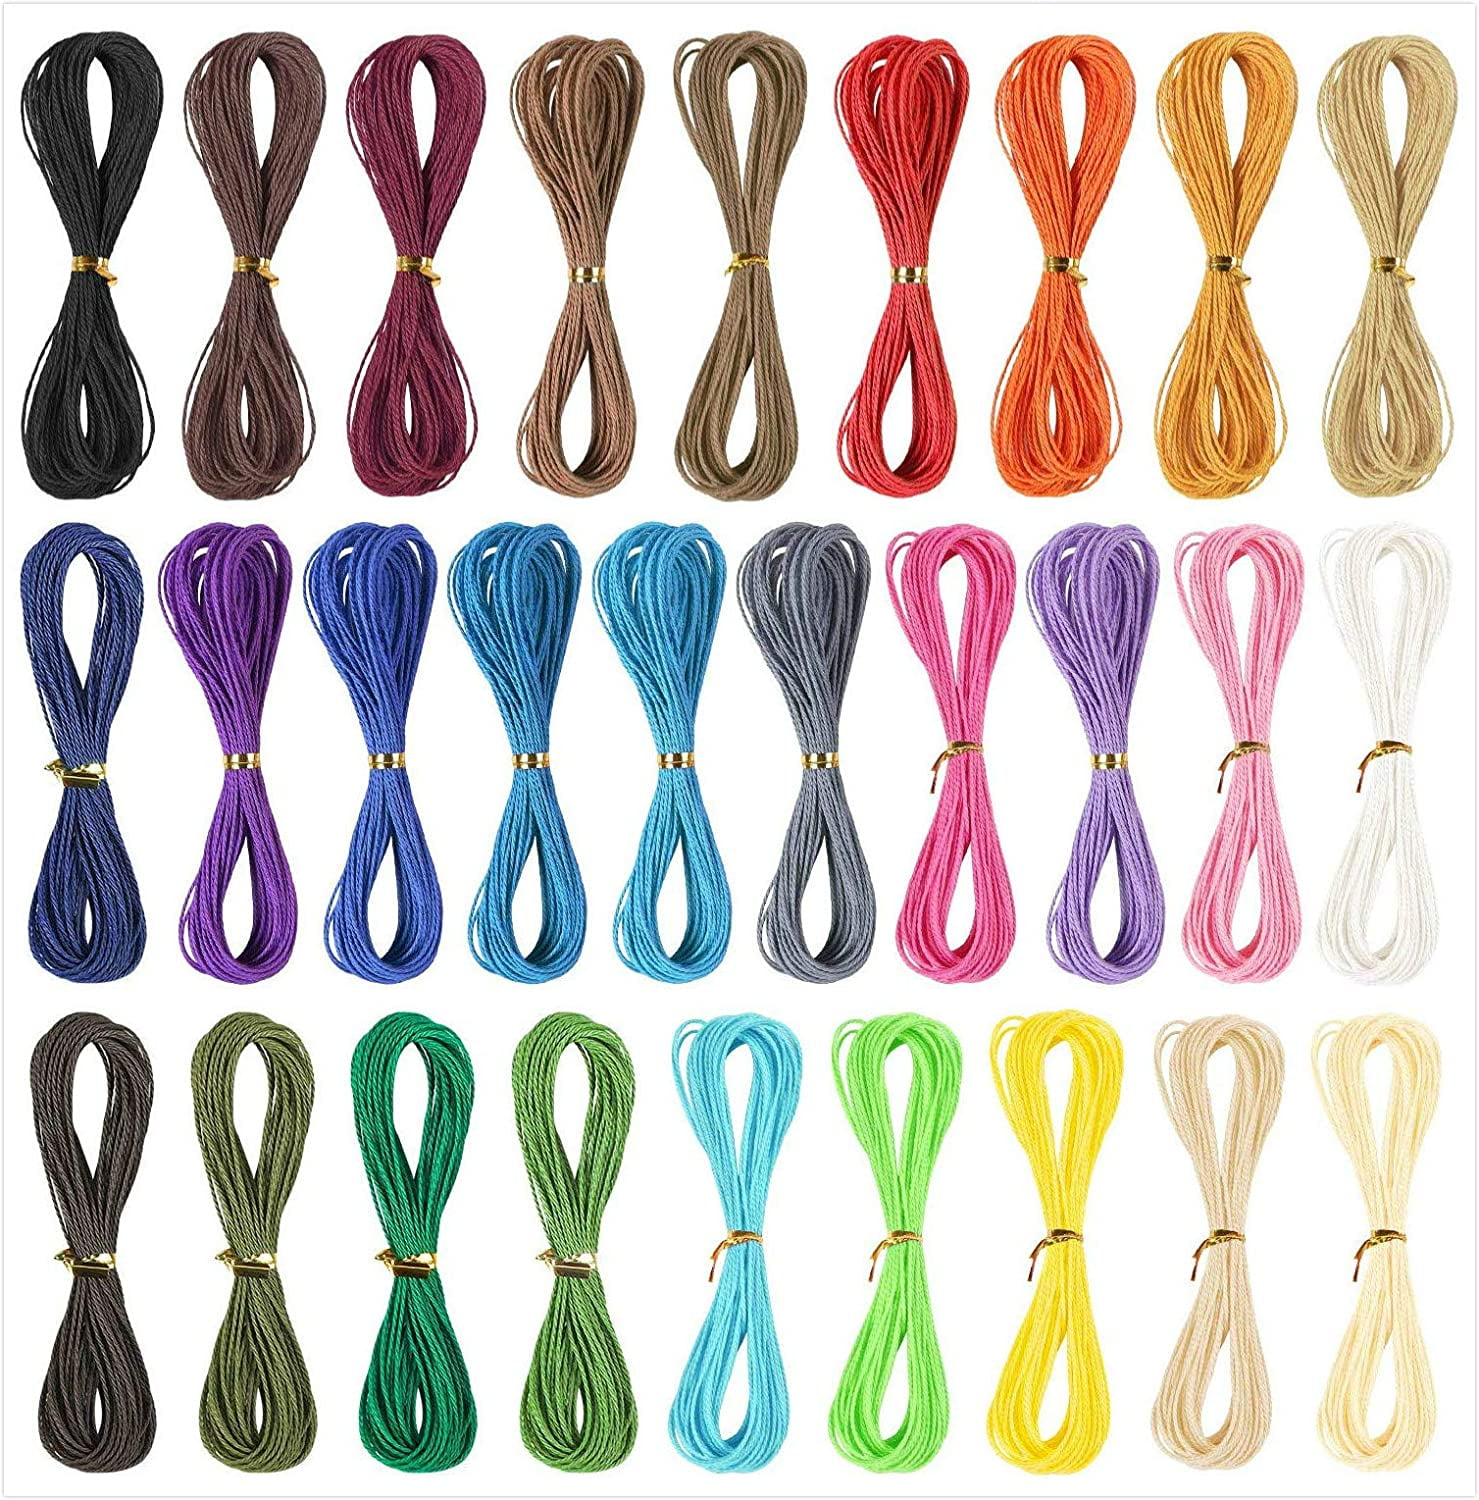 Waxed Cord 40 Colors - 1mm 437 Yards Waxed Polyester Cord Wax Cotton String  for Bracelet Making Waxed Thread for DIY Jewelry Making